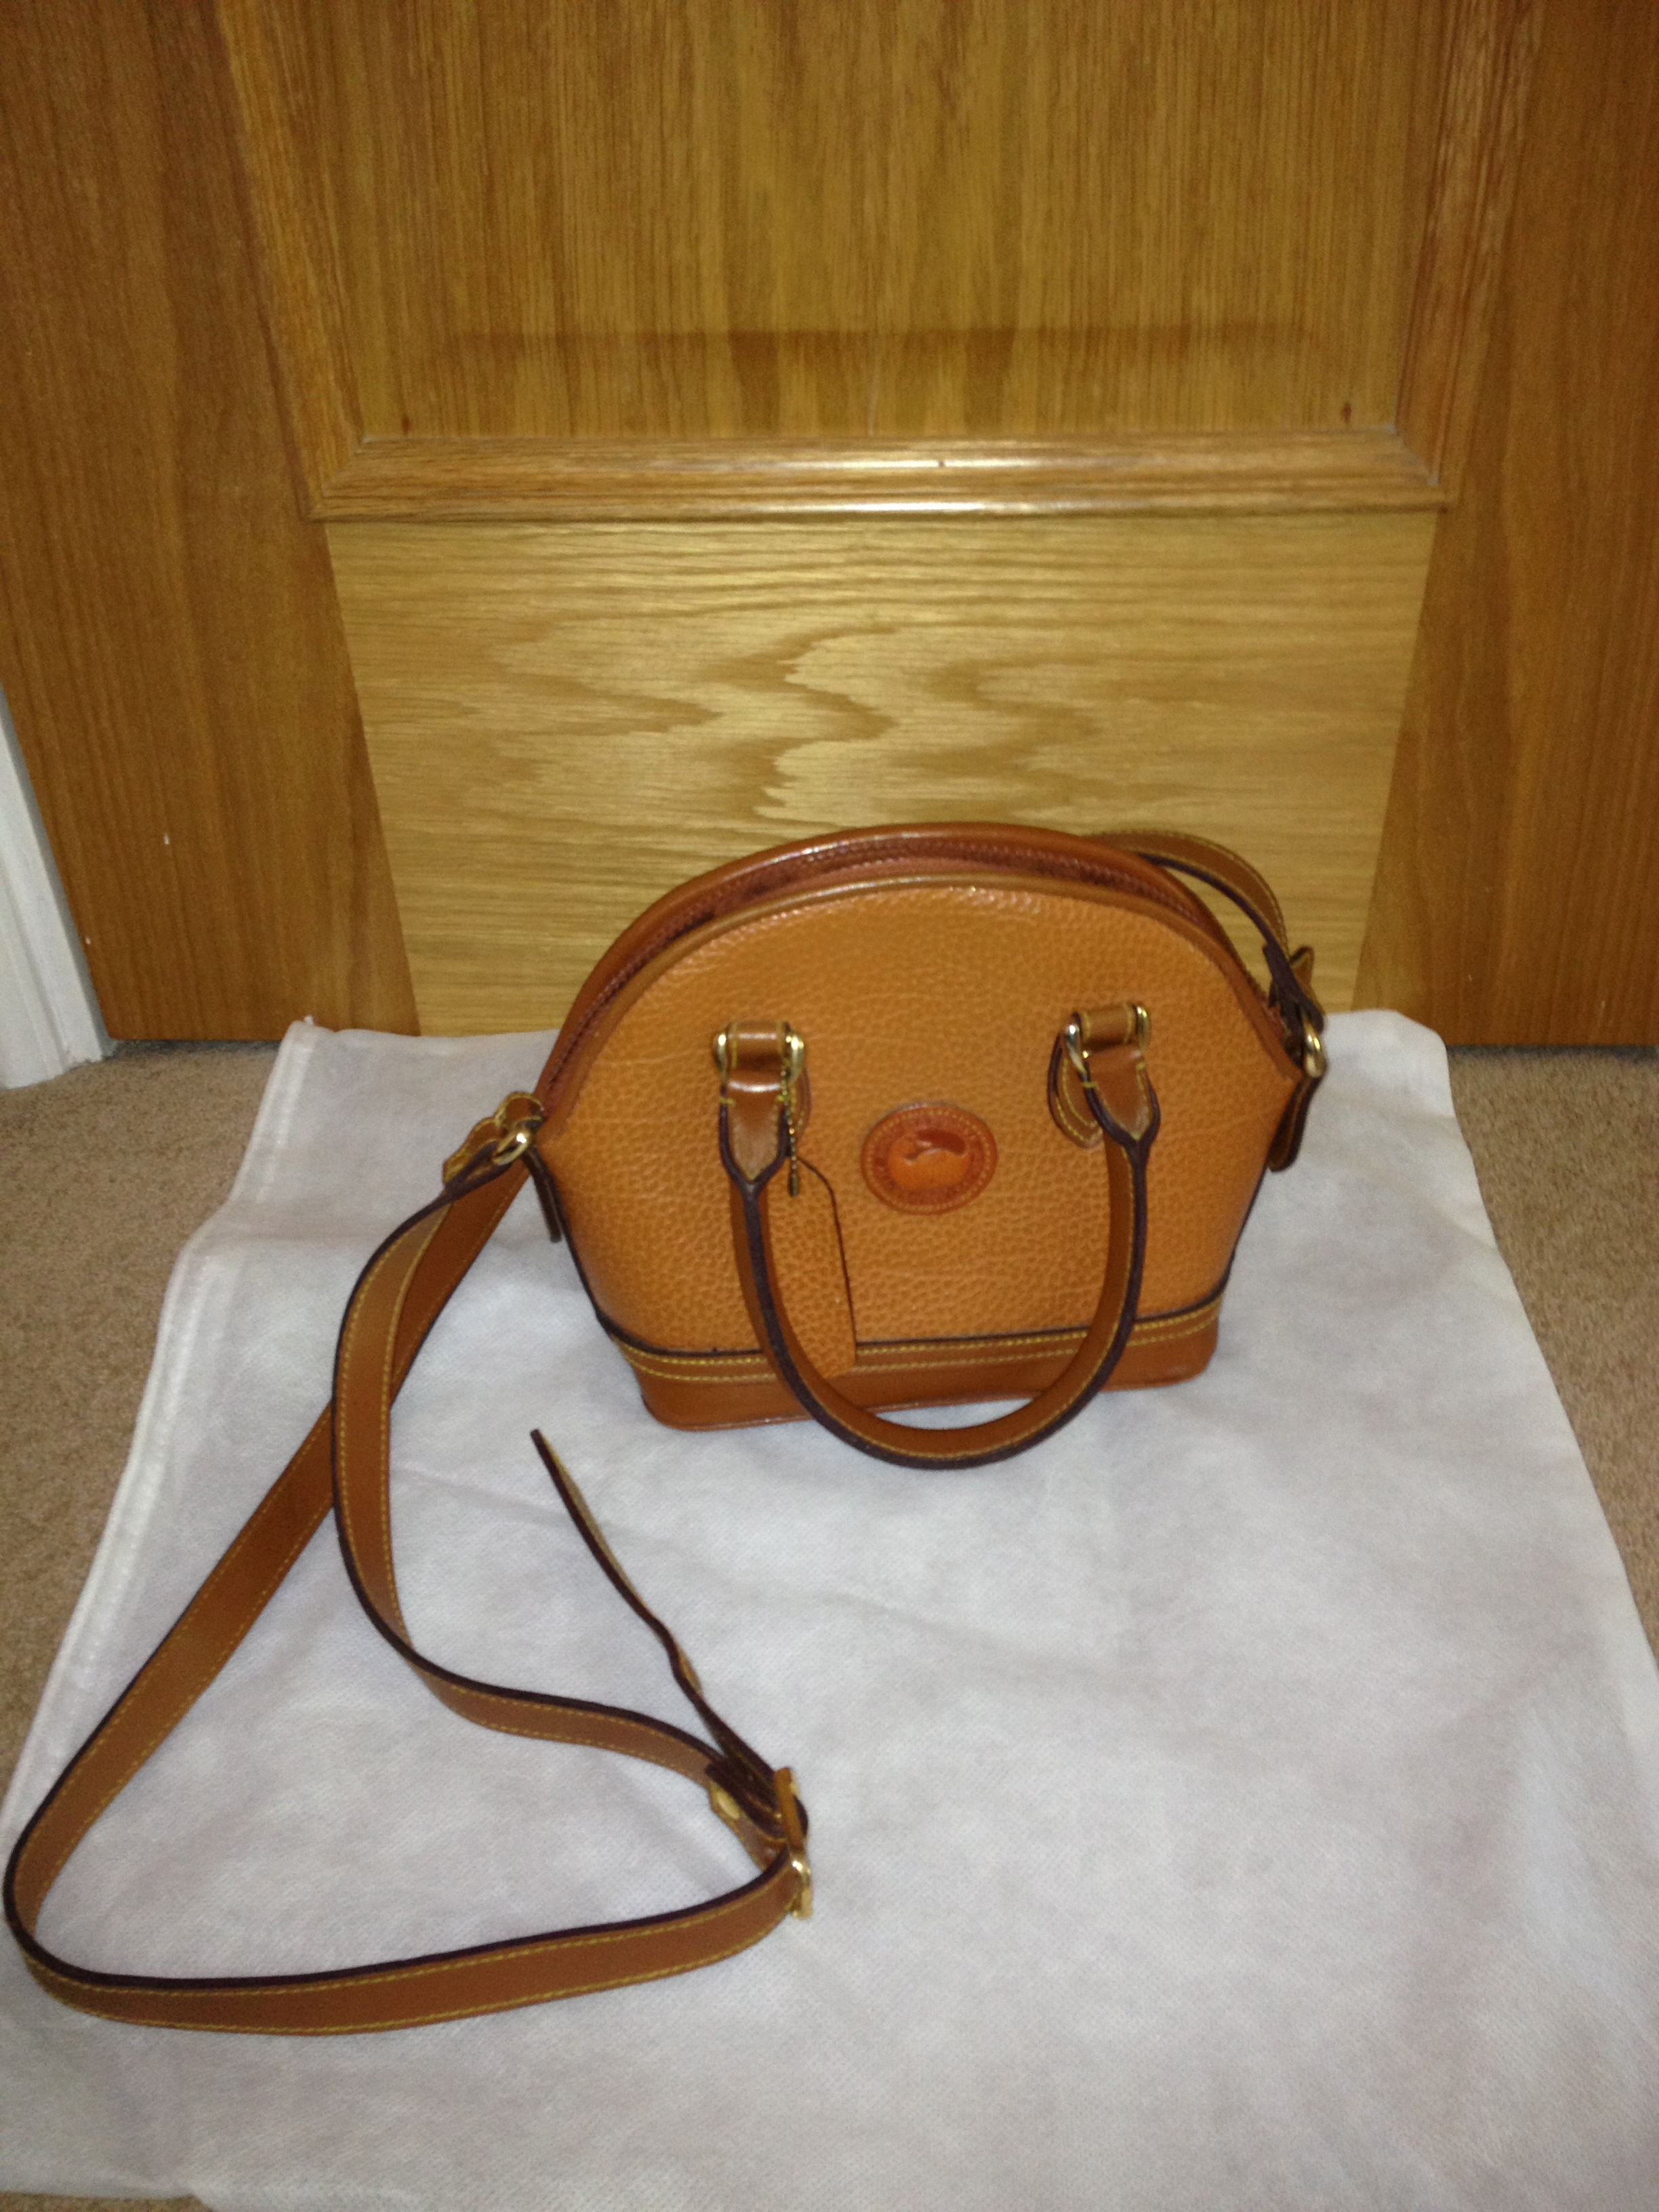 I bought this Dooney & Bourke bag at a thrift store – how much is it worth?